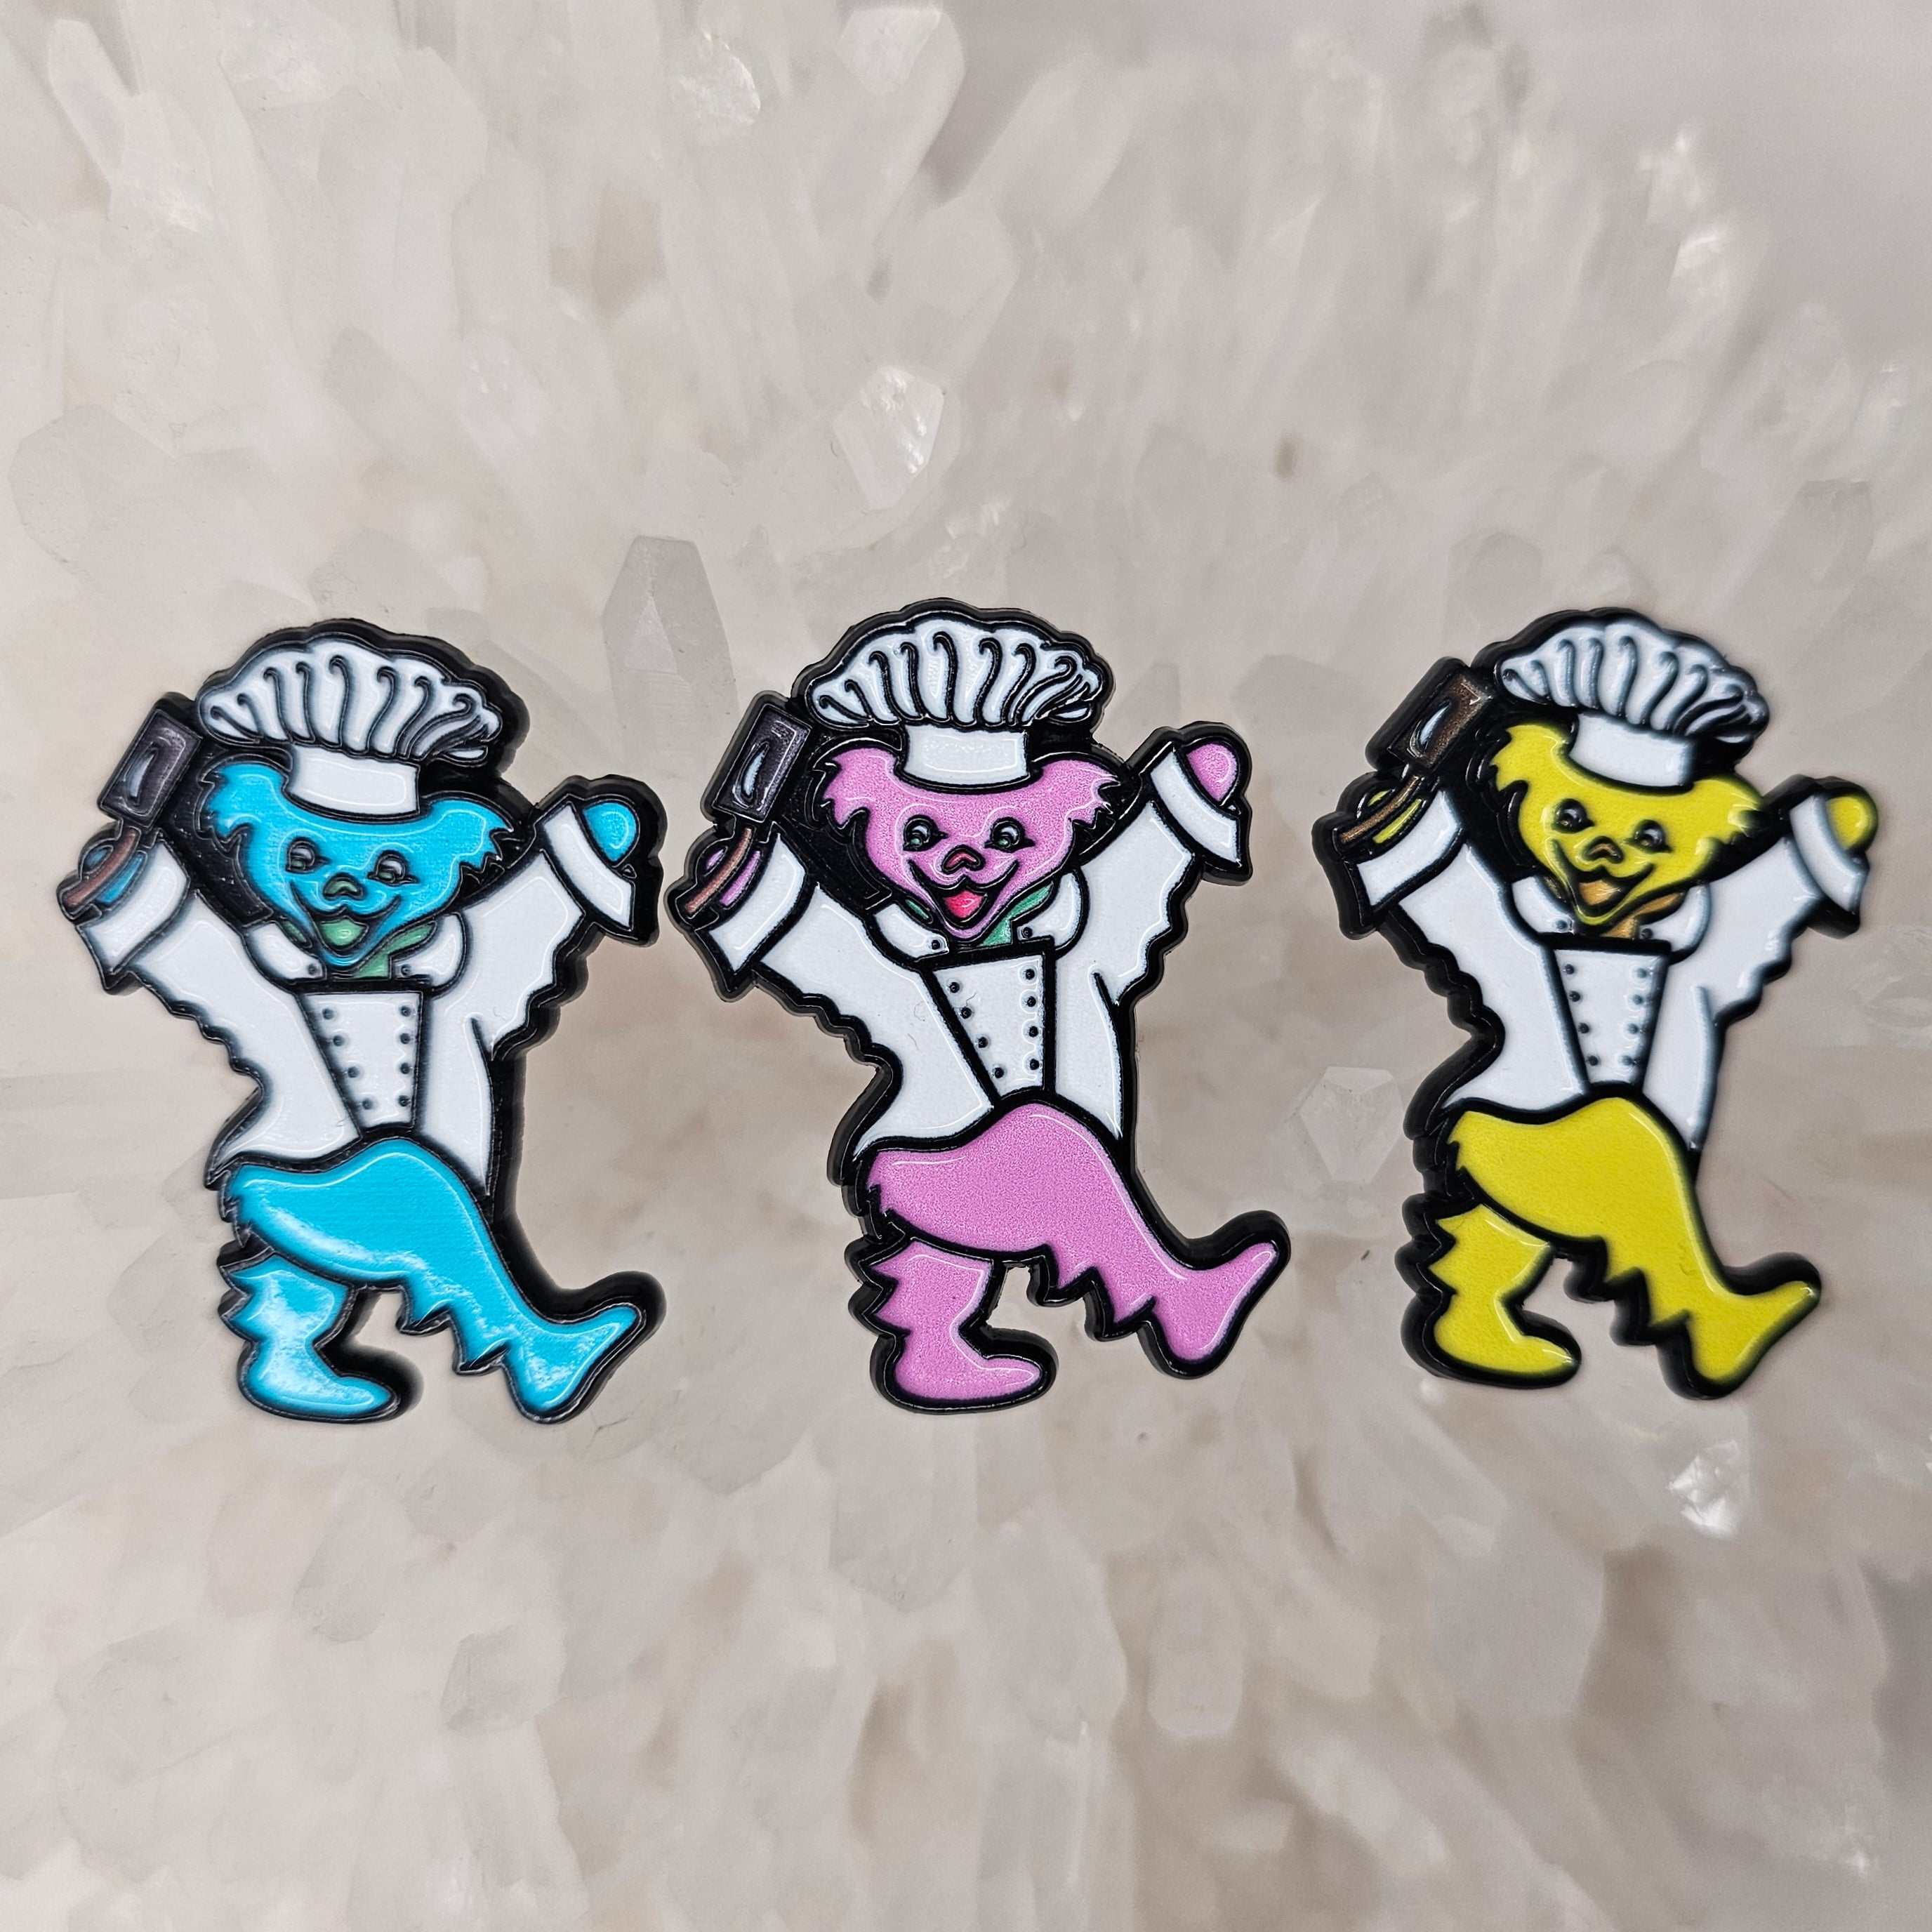 Adult Pins – Mythical Merch